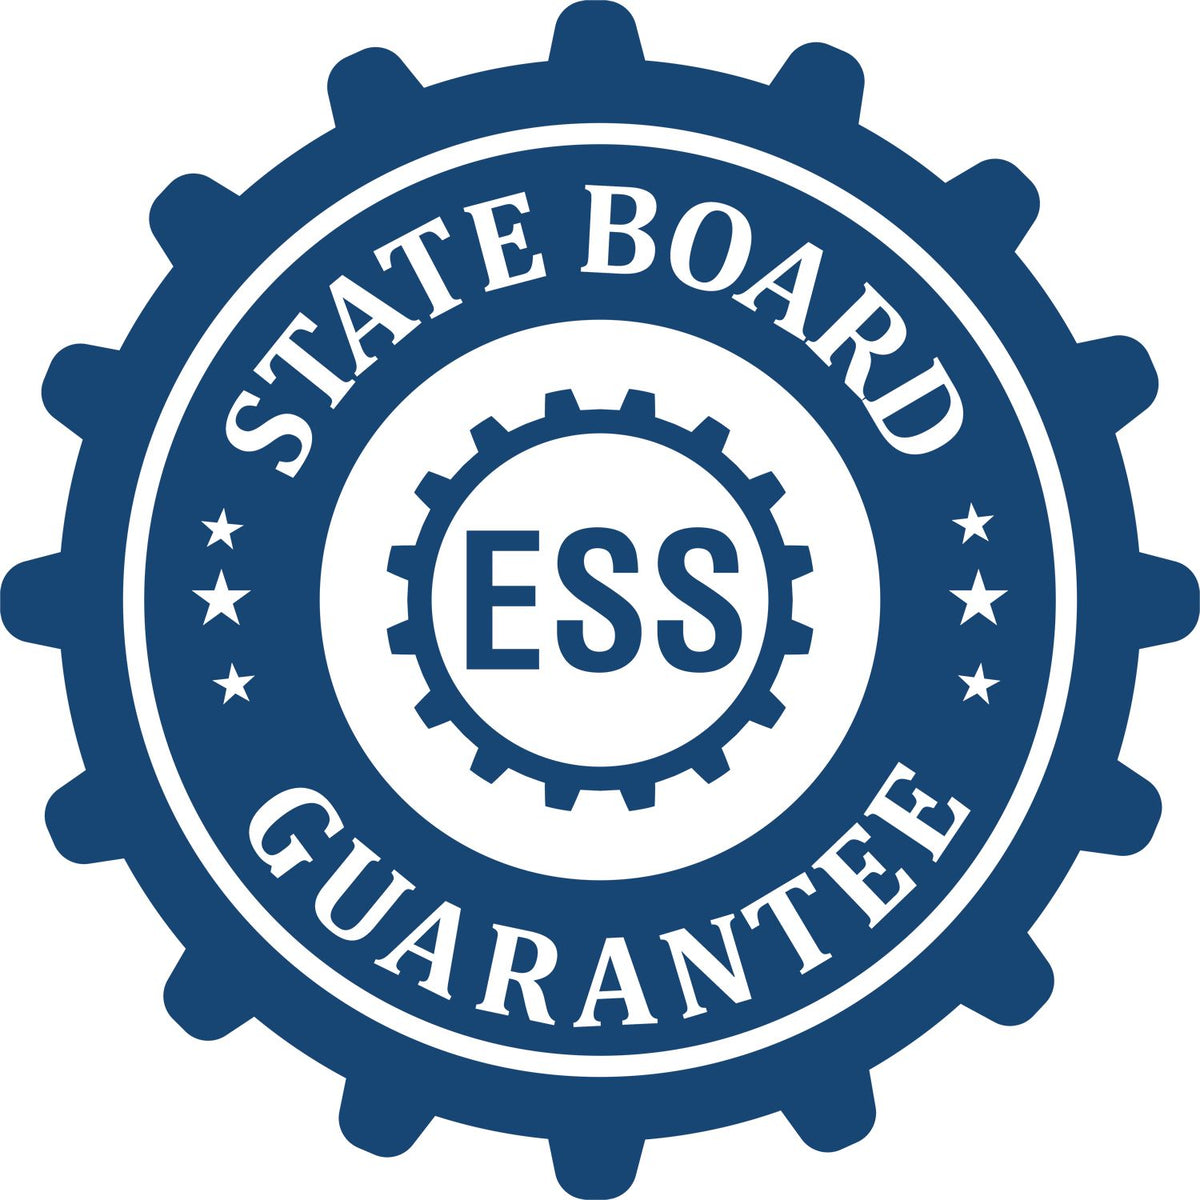 An emblem in a gear shape illustrating a state board guarantee for the Florida Landscape Architectural Seal Stamp product.